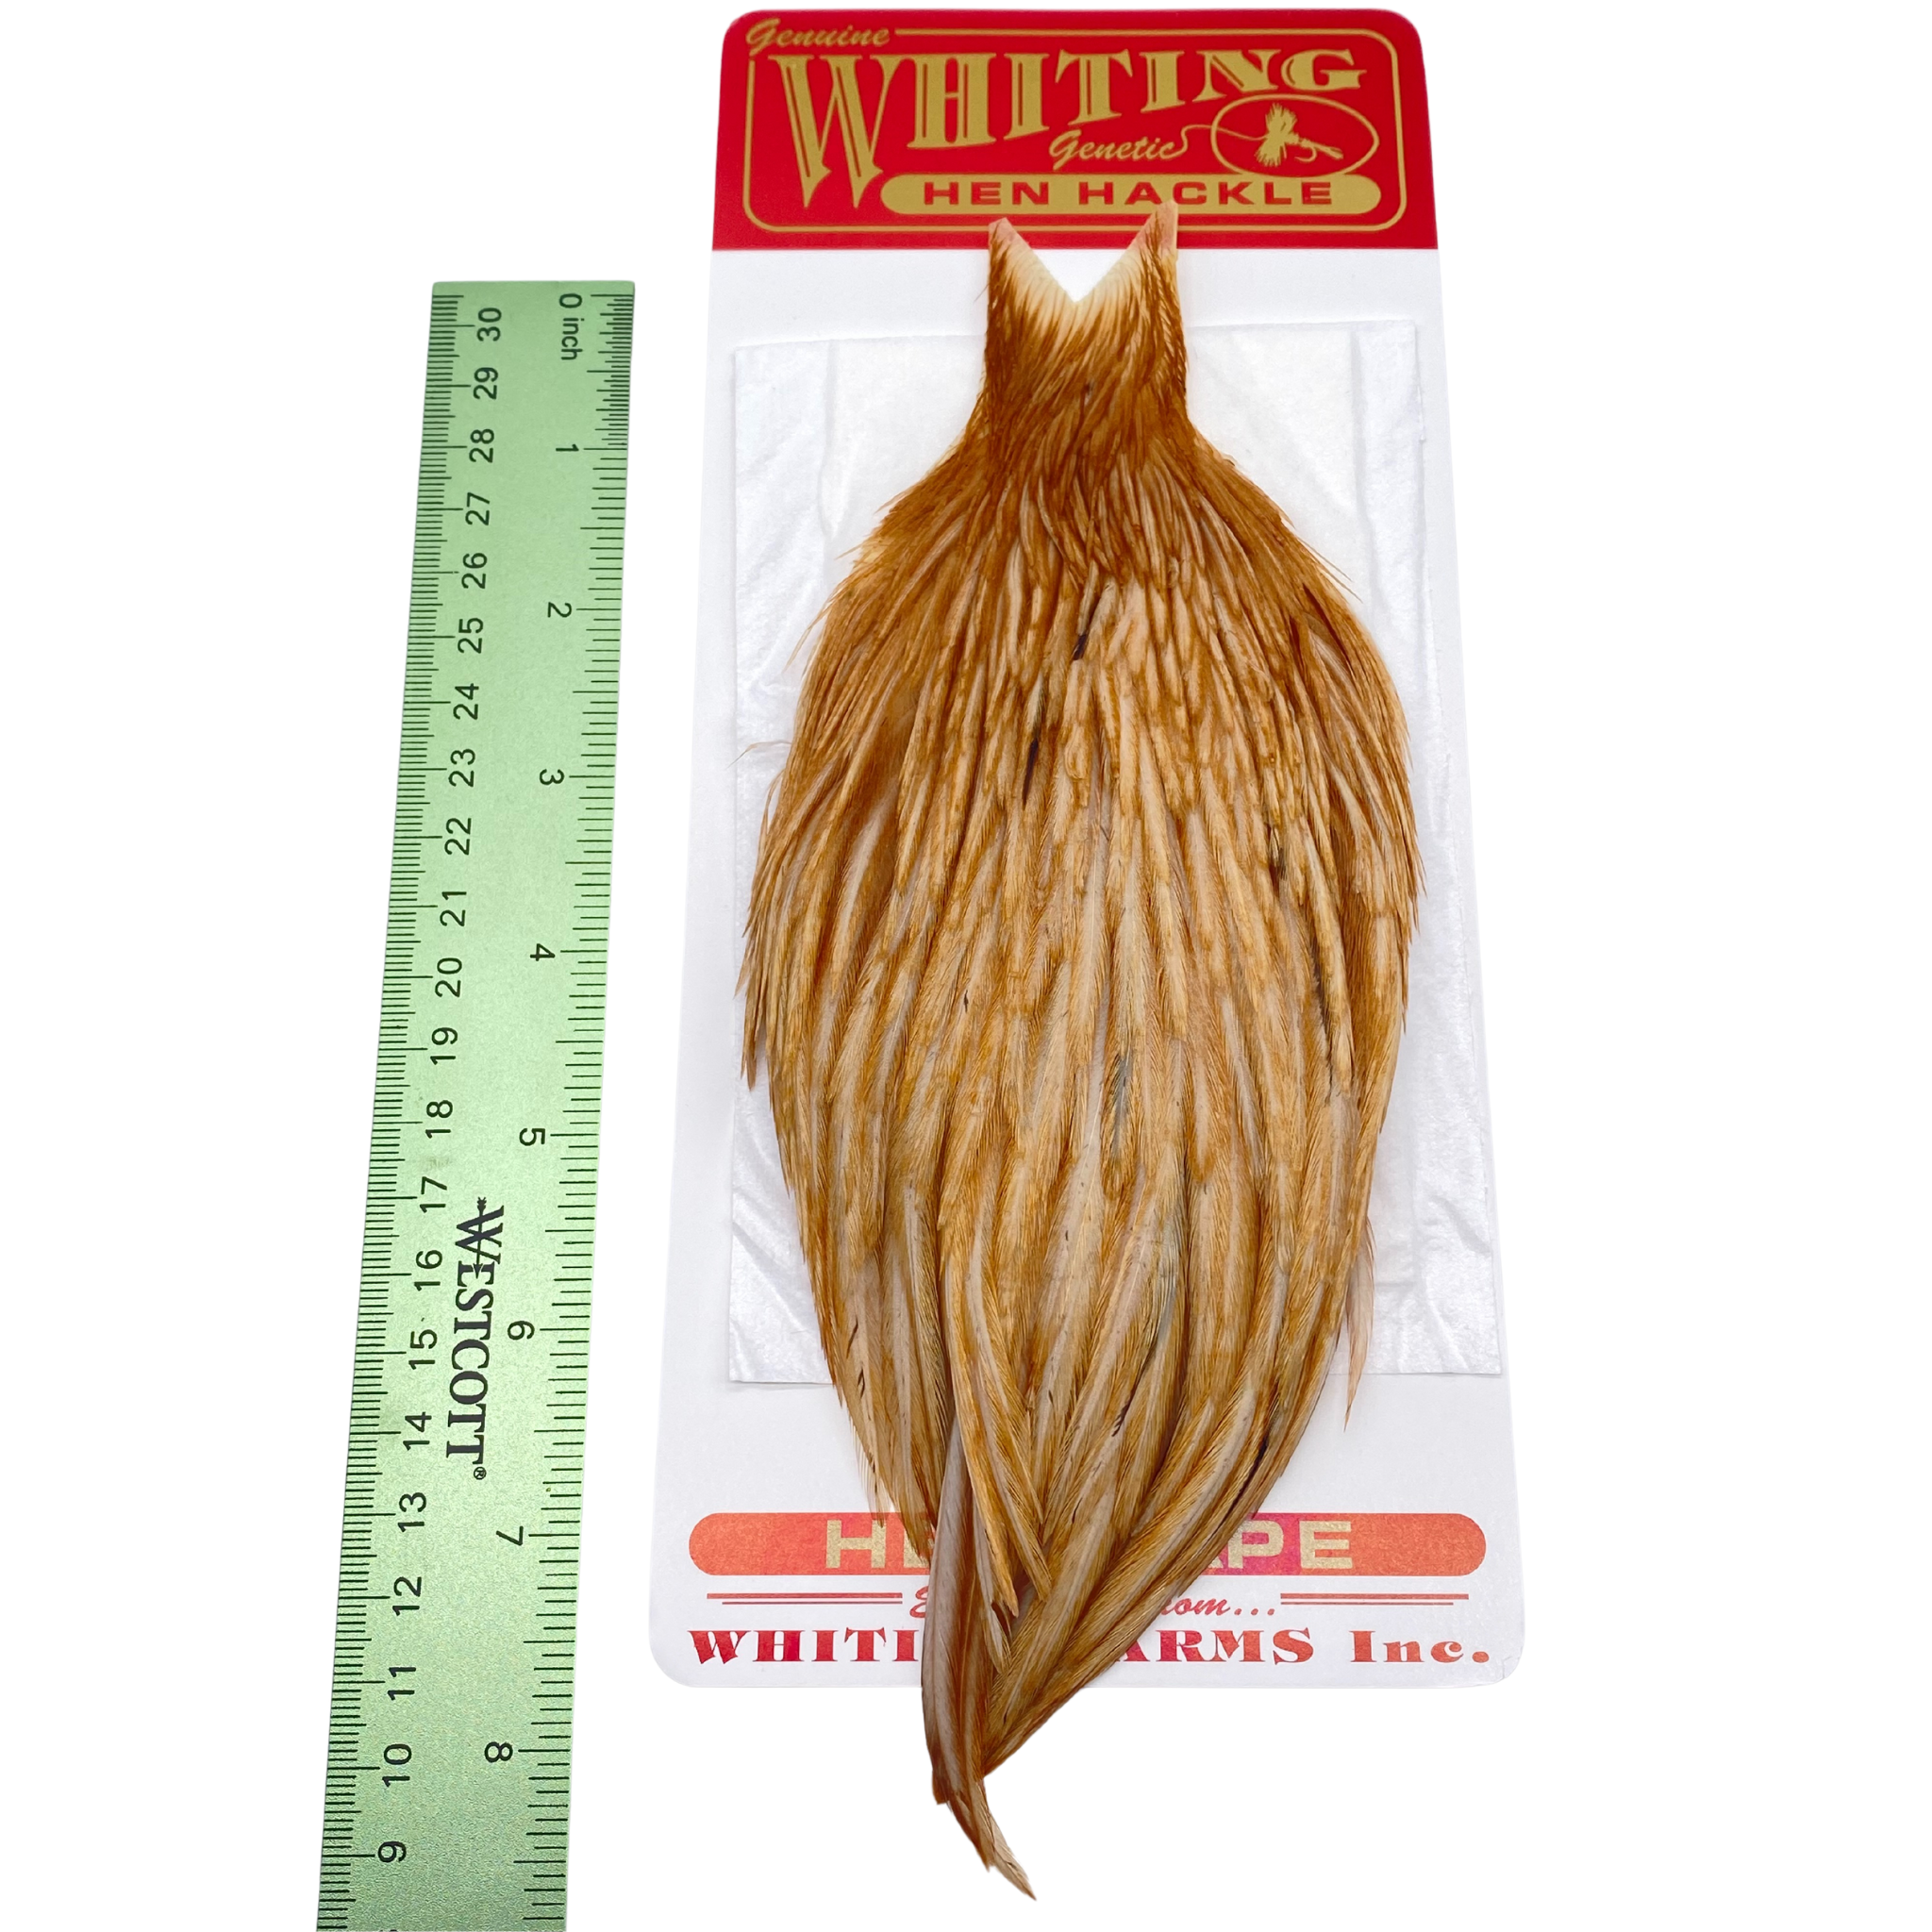 Whiting Hen Cape - ( WHITING FARMS, INC)